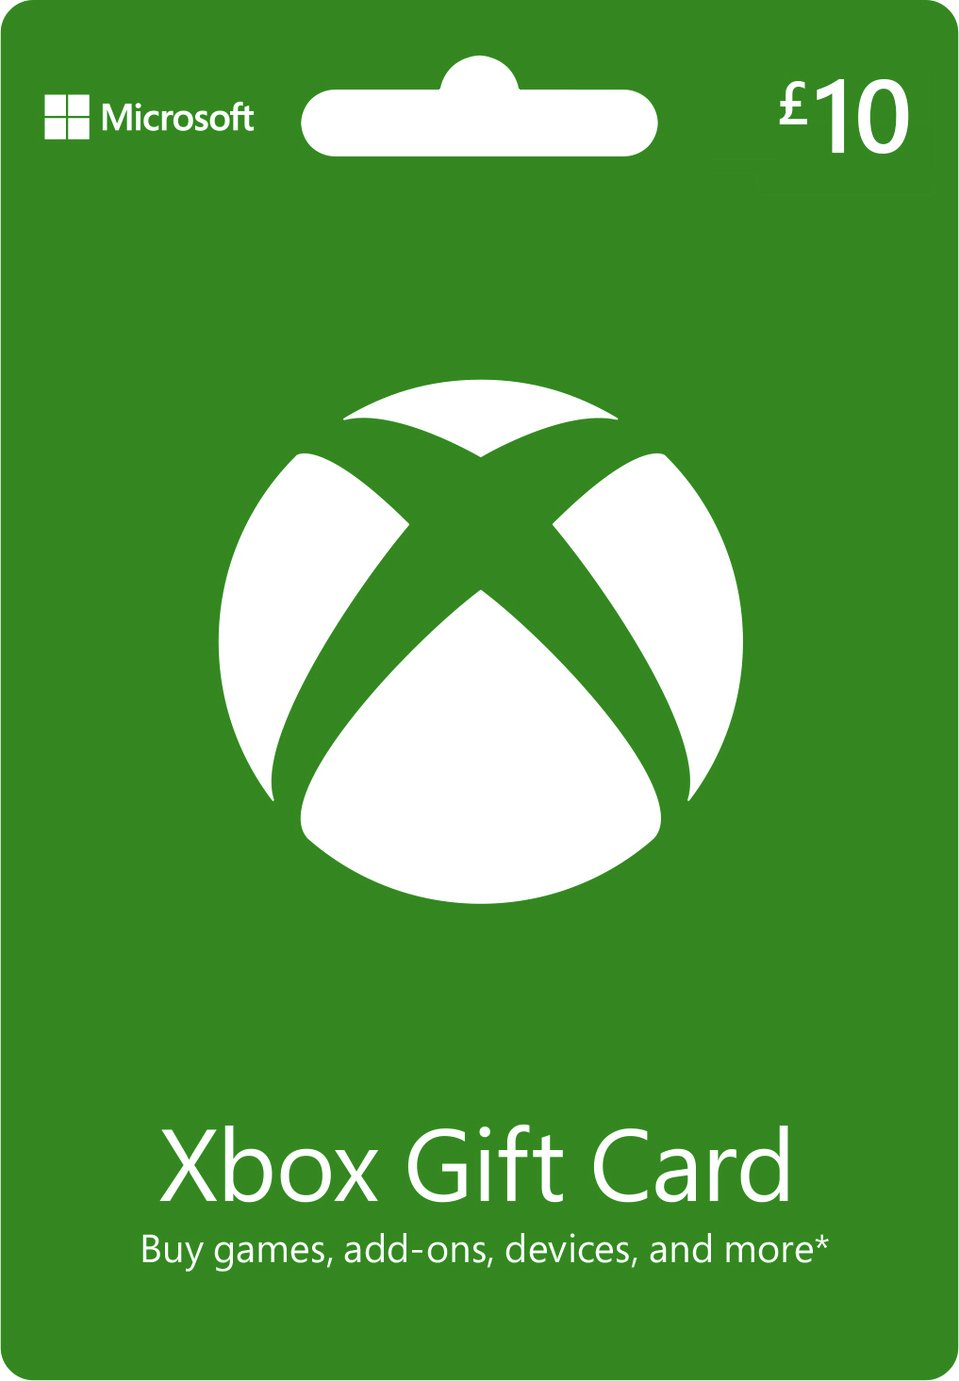 how to add gift card to xbox one account